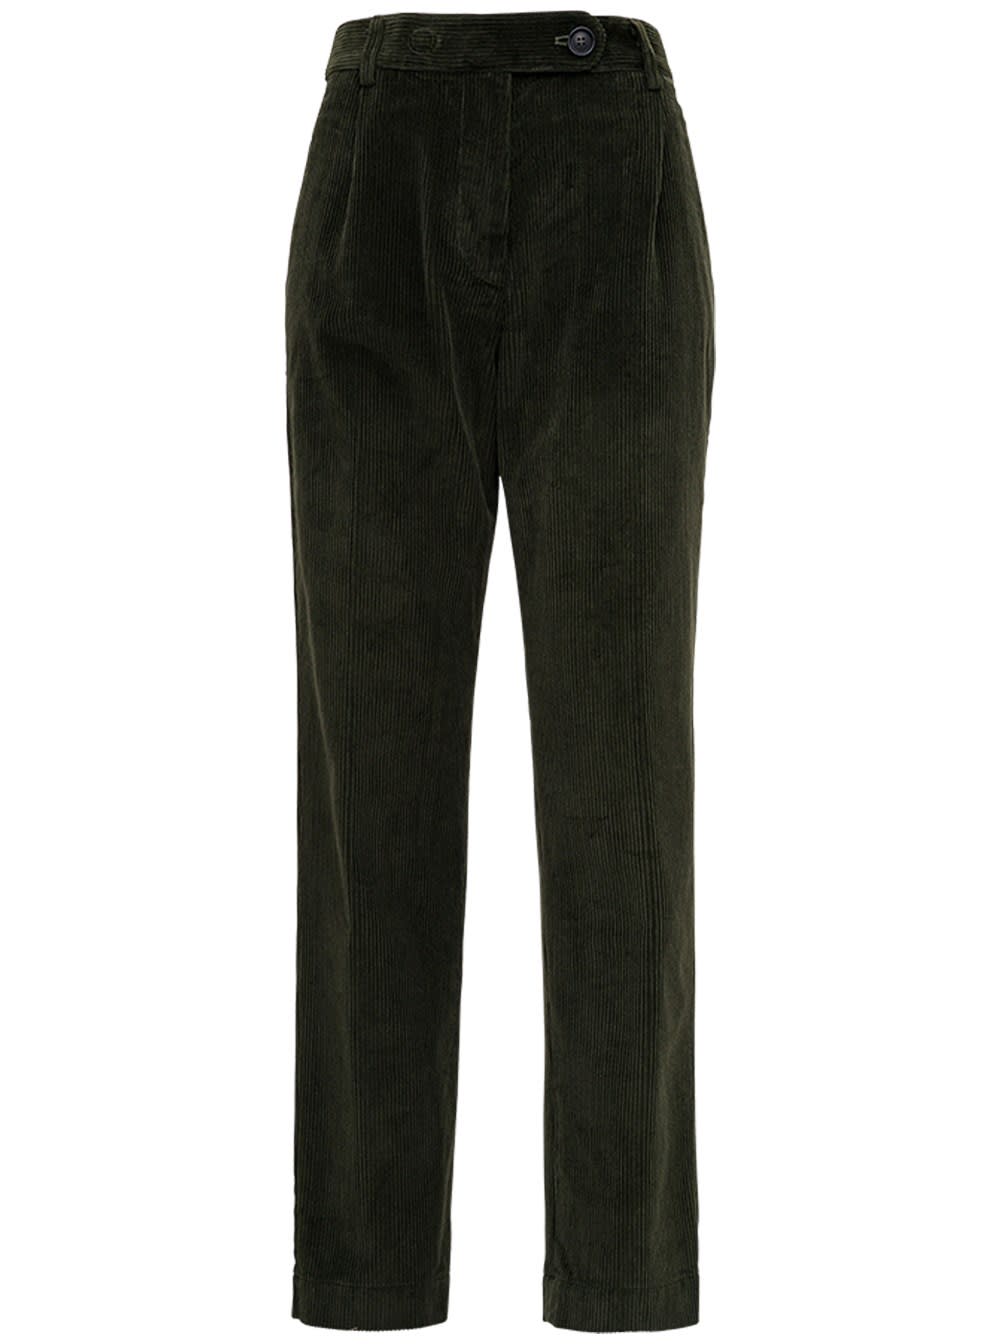 SEMICOUTURE Claudie Green Cotton Ribbed Trousers